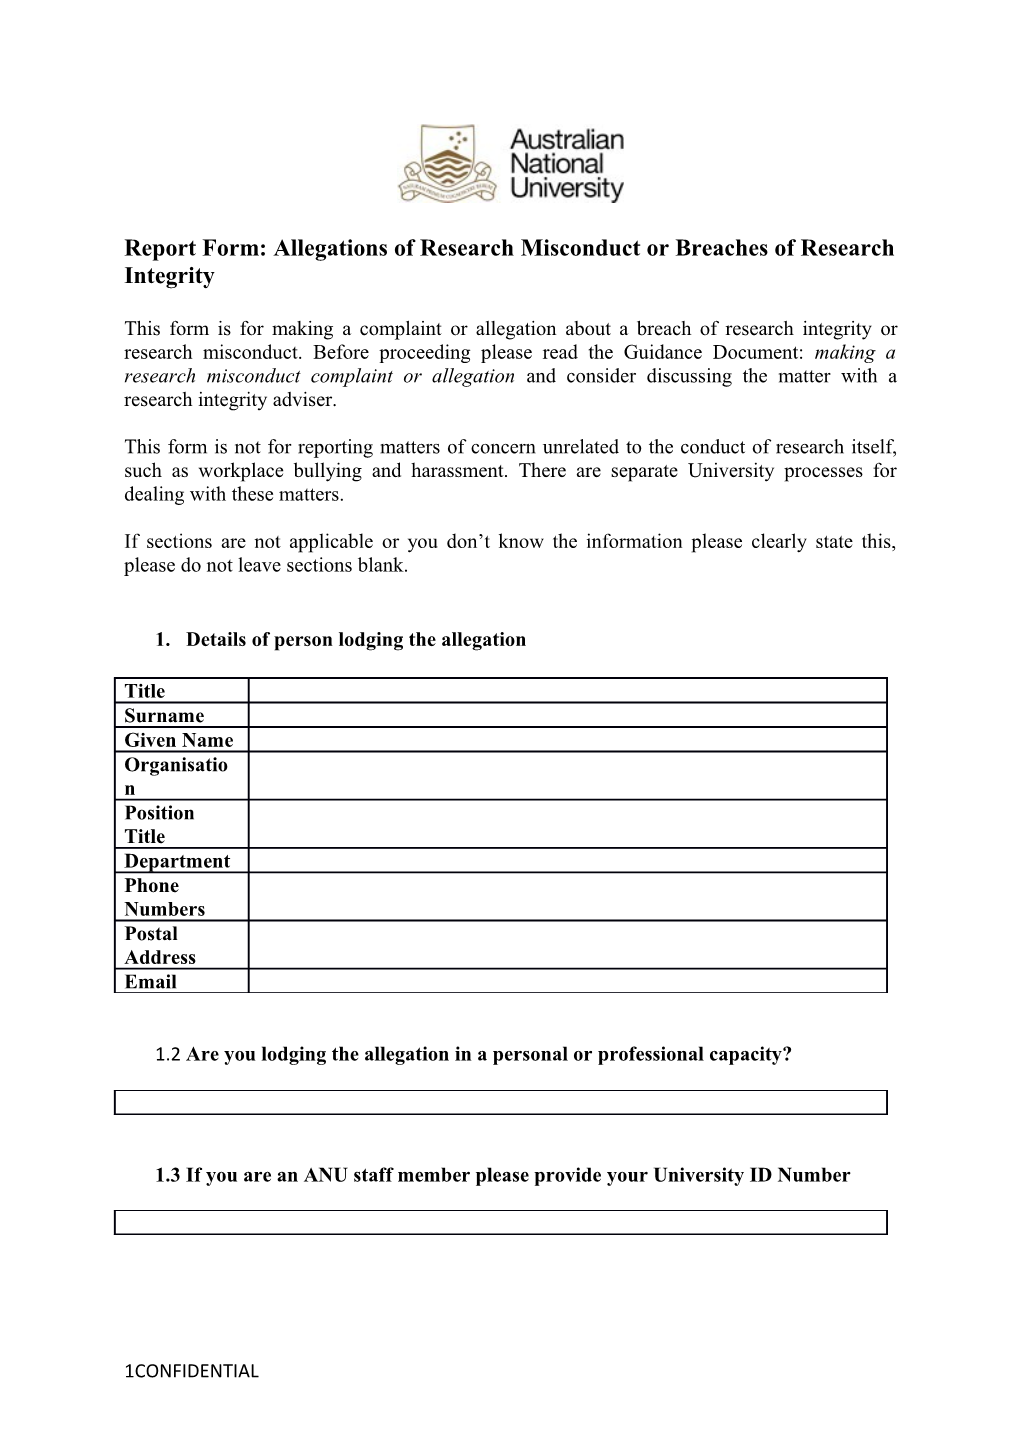 Report Form: Allegations of Research Misconduct Or Breaches of Research Integrity